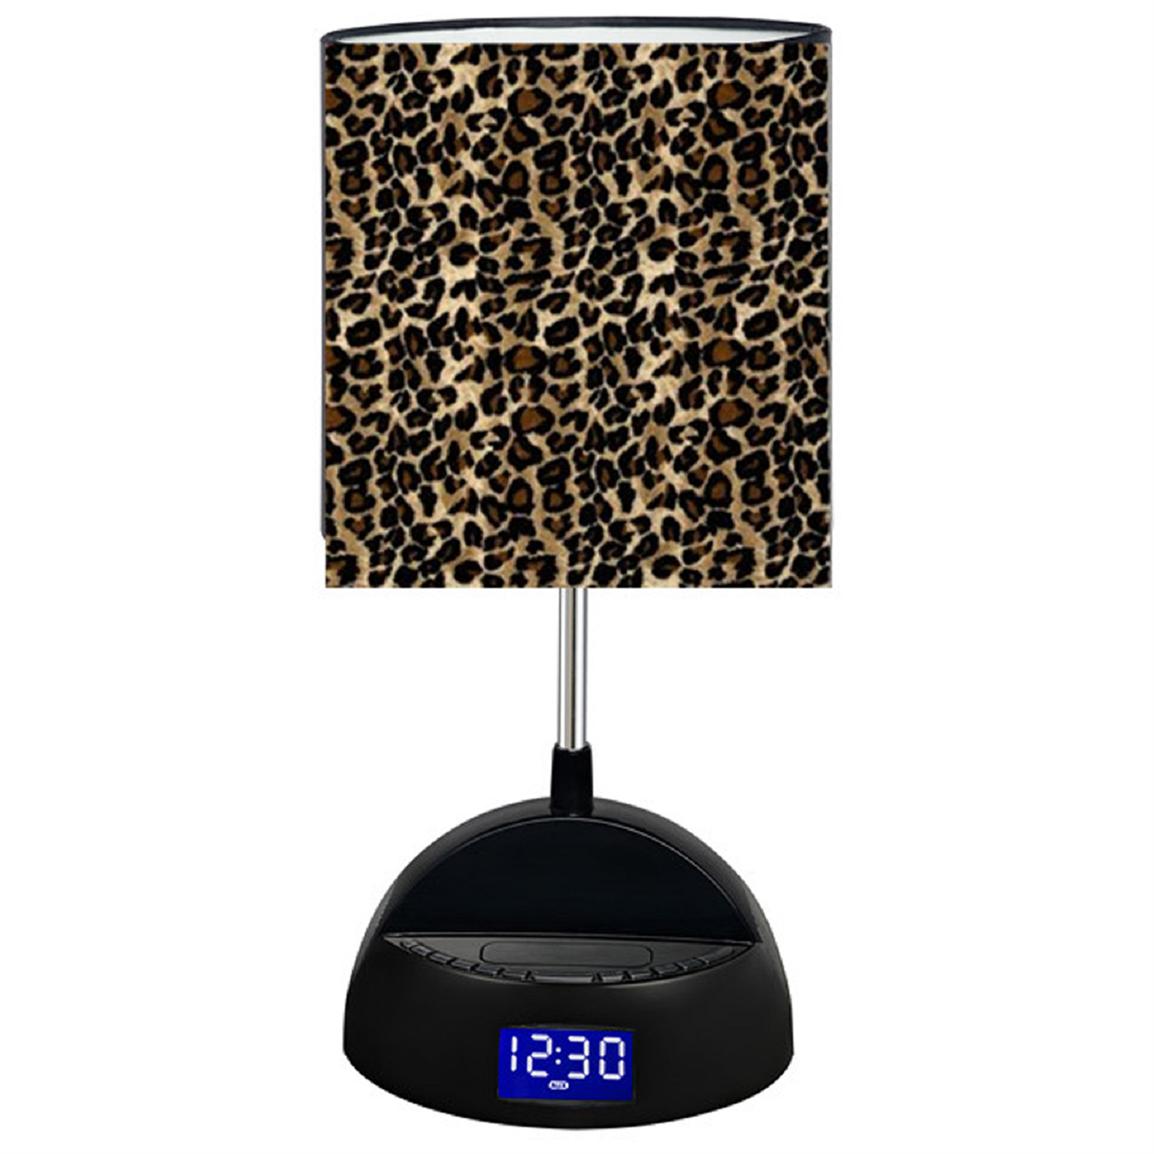 Bluetooth Speaker Lamp with Leopard Shade - 423962, Lighting at